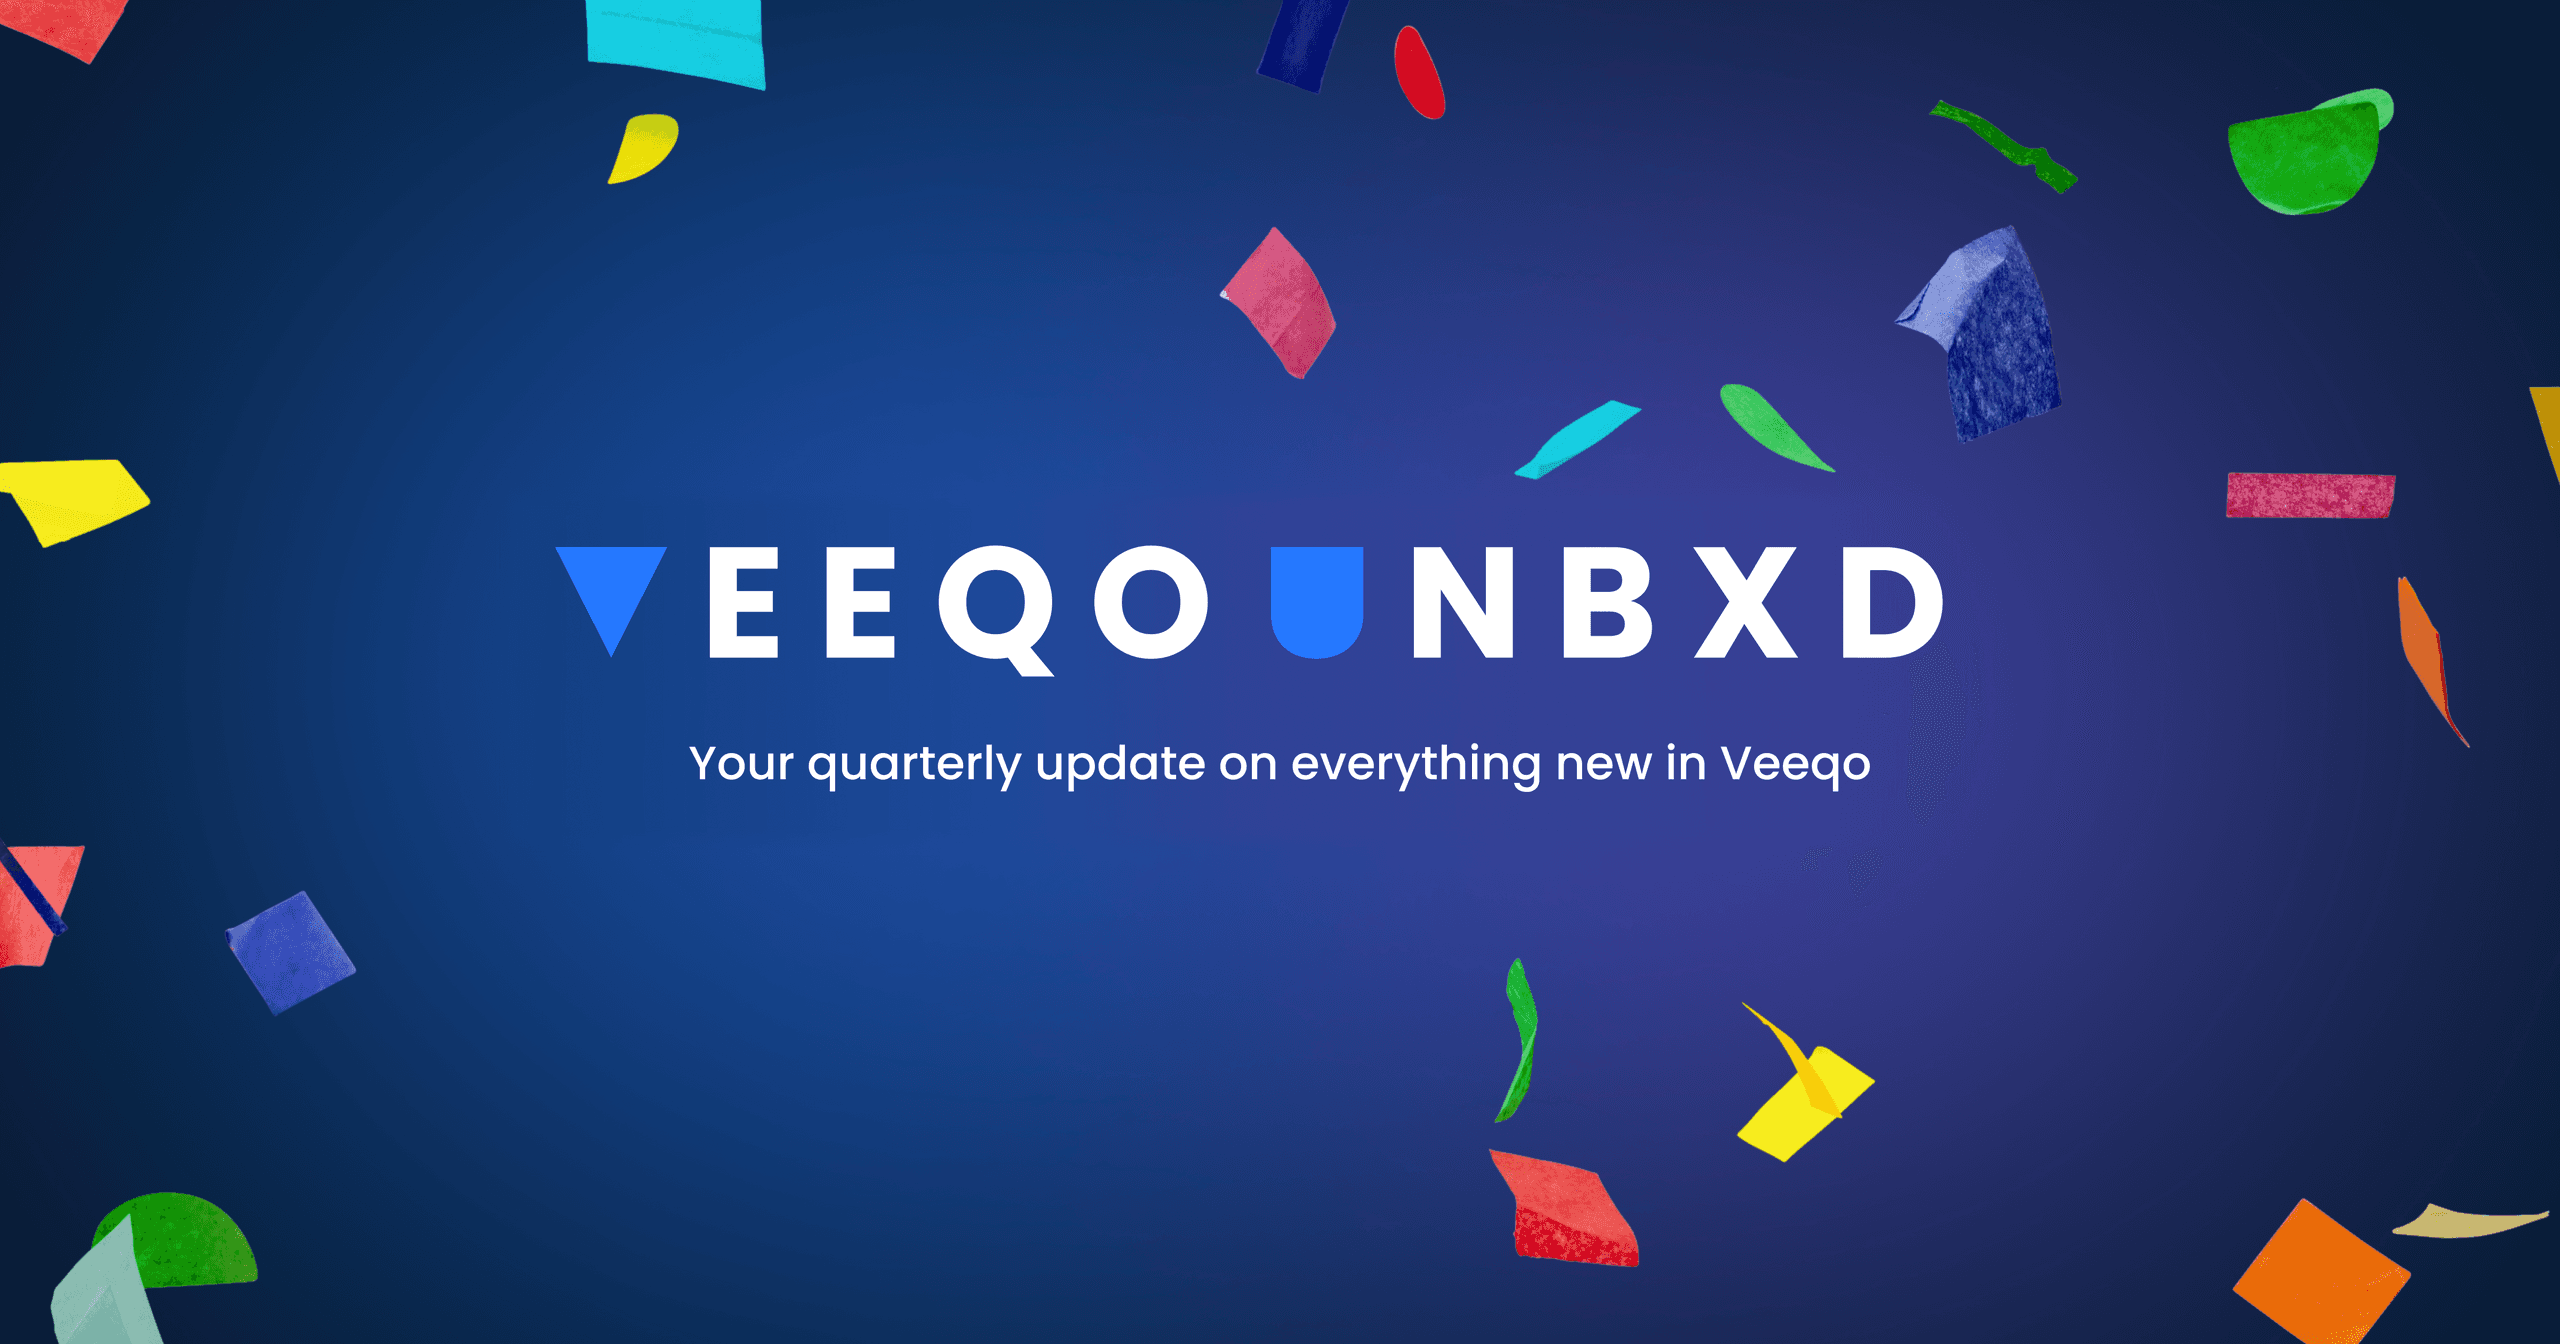 Veeqo Unboxed: A Quarterly Update on What’s New in Veeqo